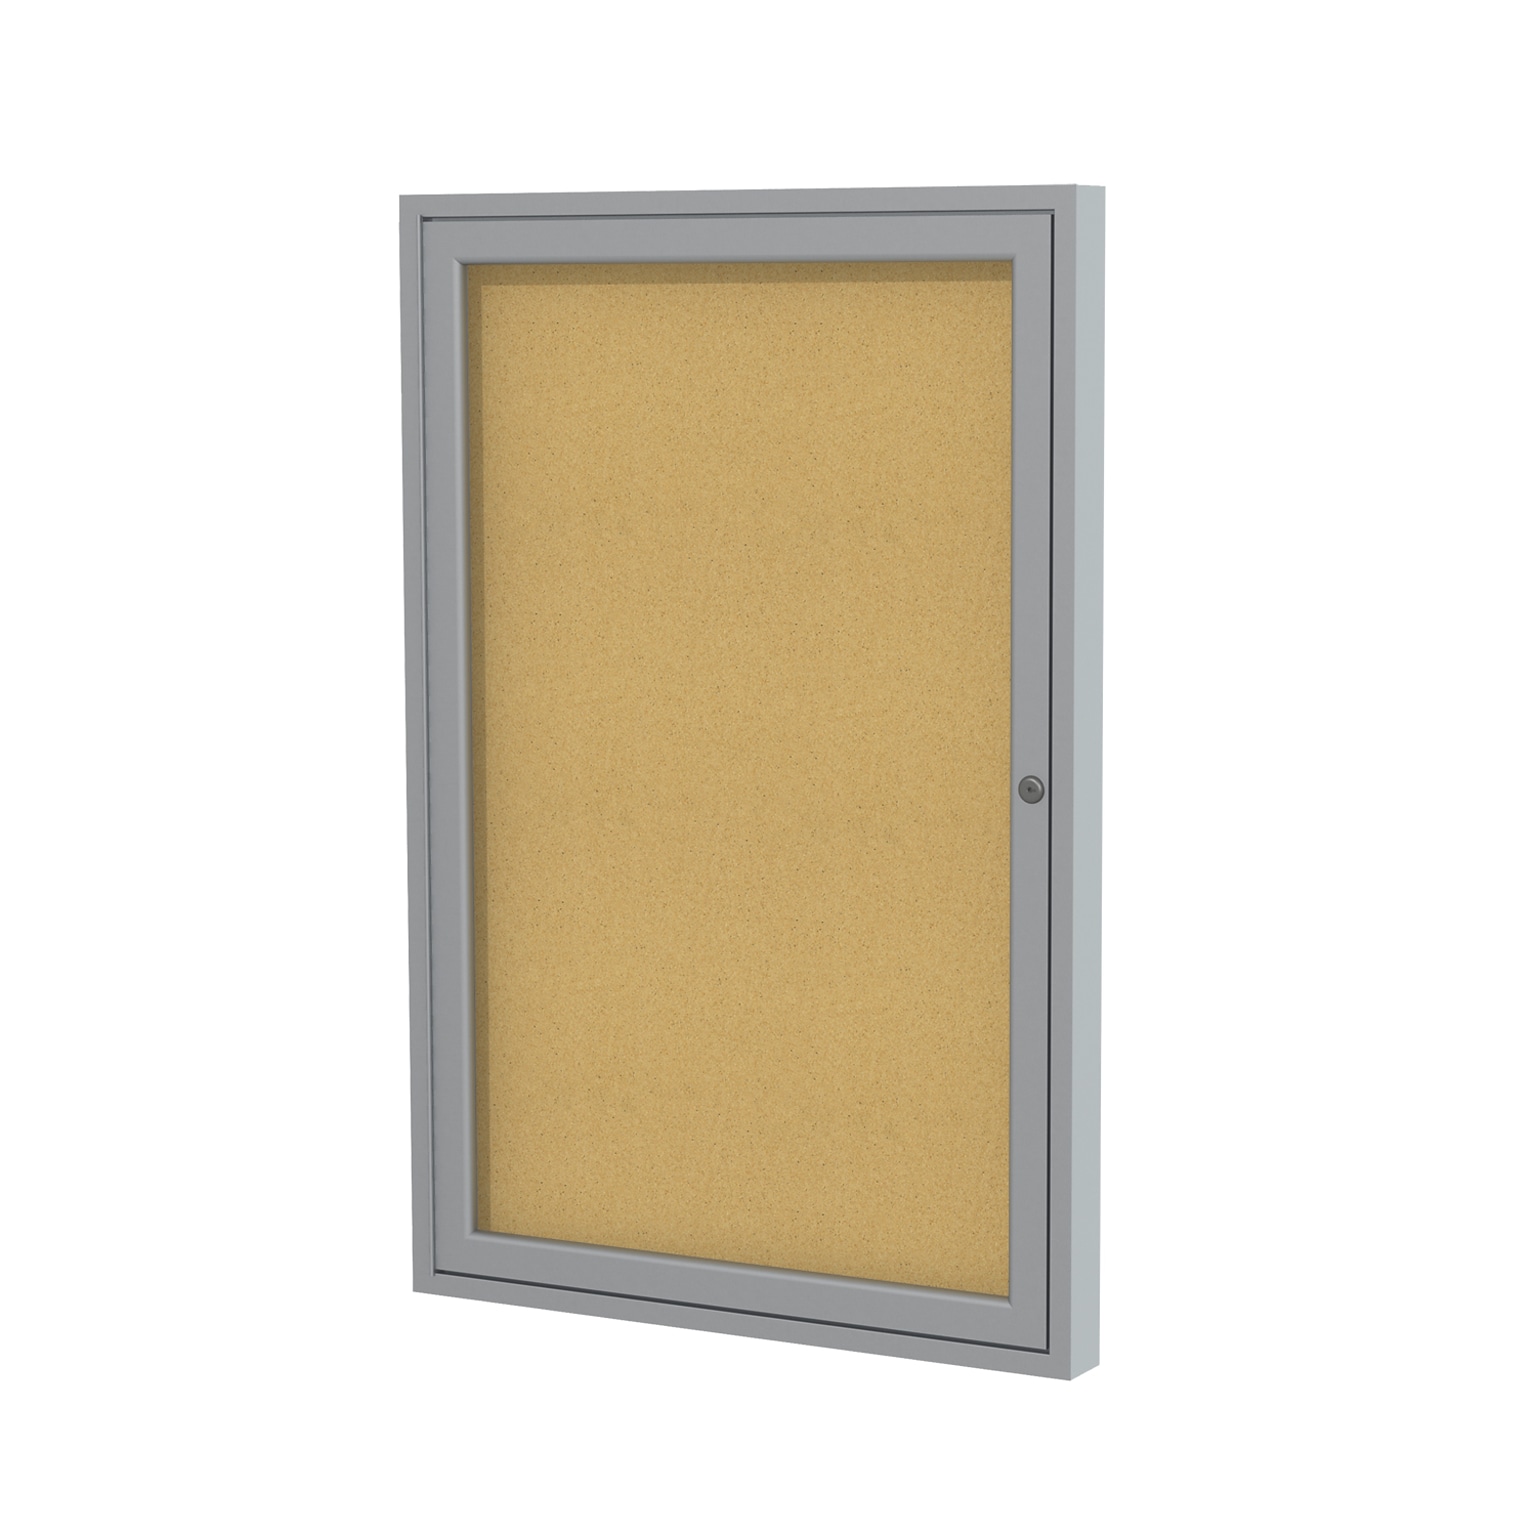 Ghent 3 H x 3 W Enclosed Natural Cork Bulletin Board with Satin Frame, 1 Door (PA13636K)